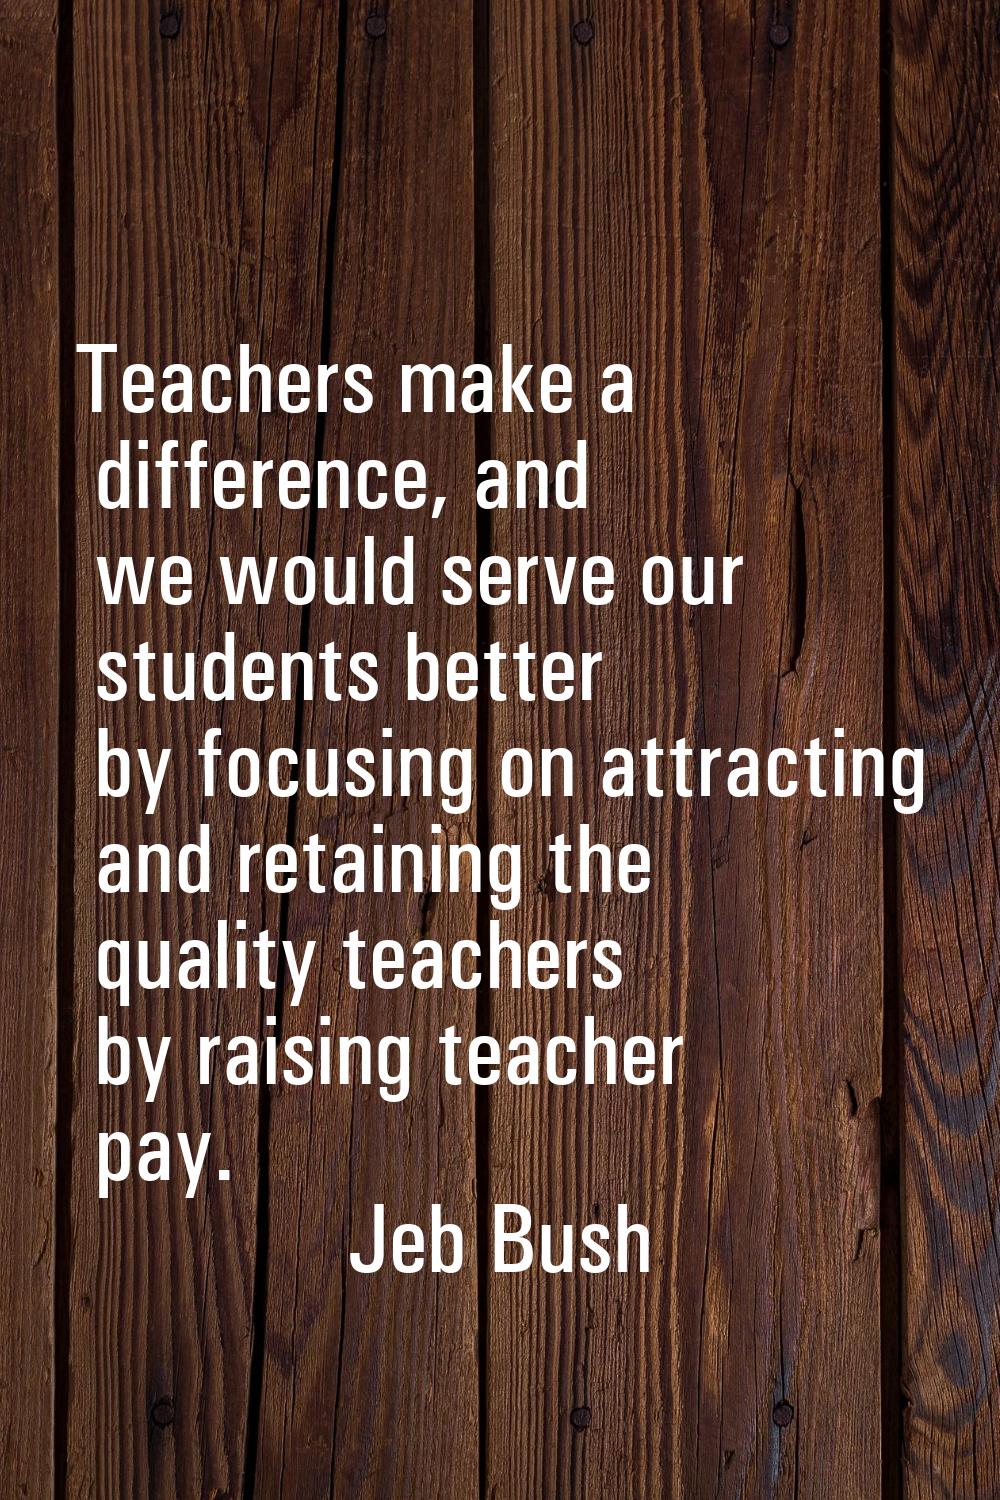 Teachers make a difference, and we would serve our students better by focusing on attracting and re